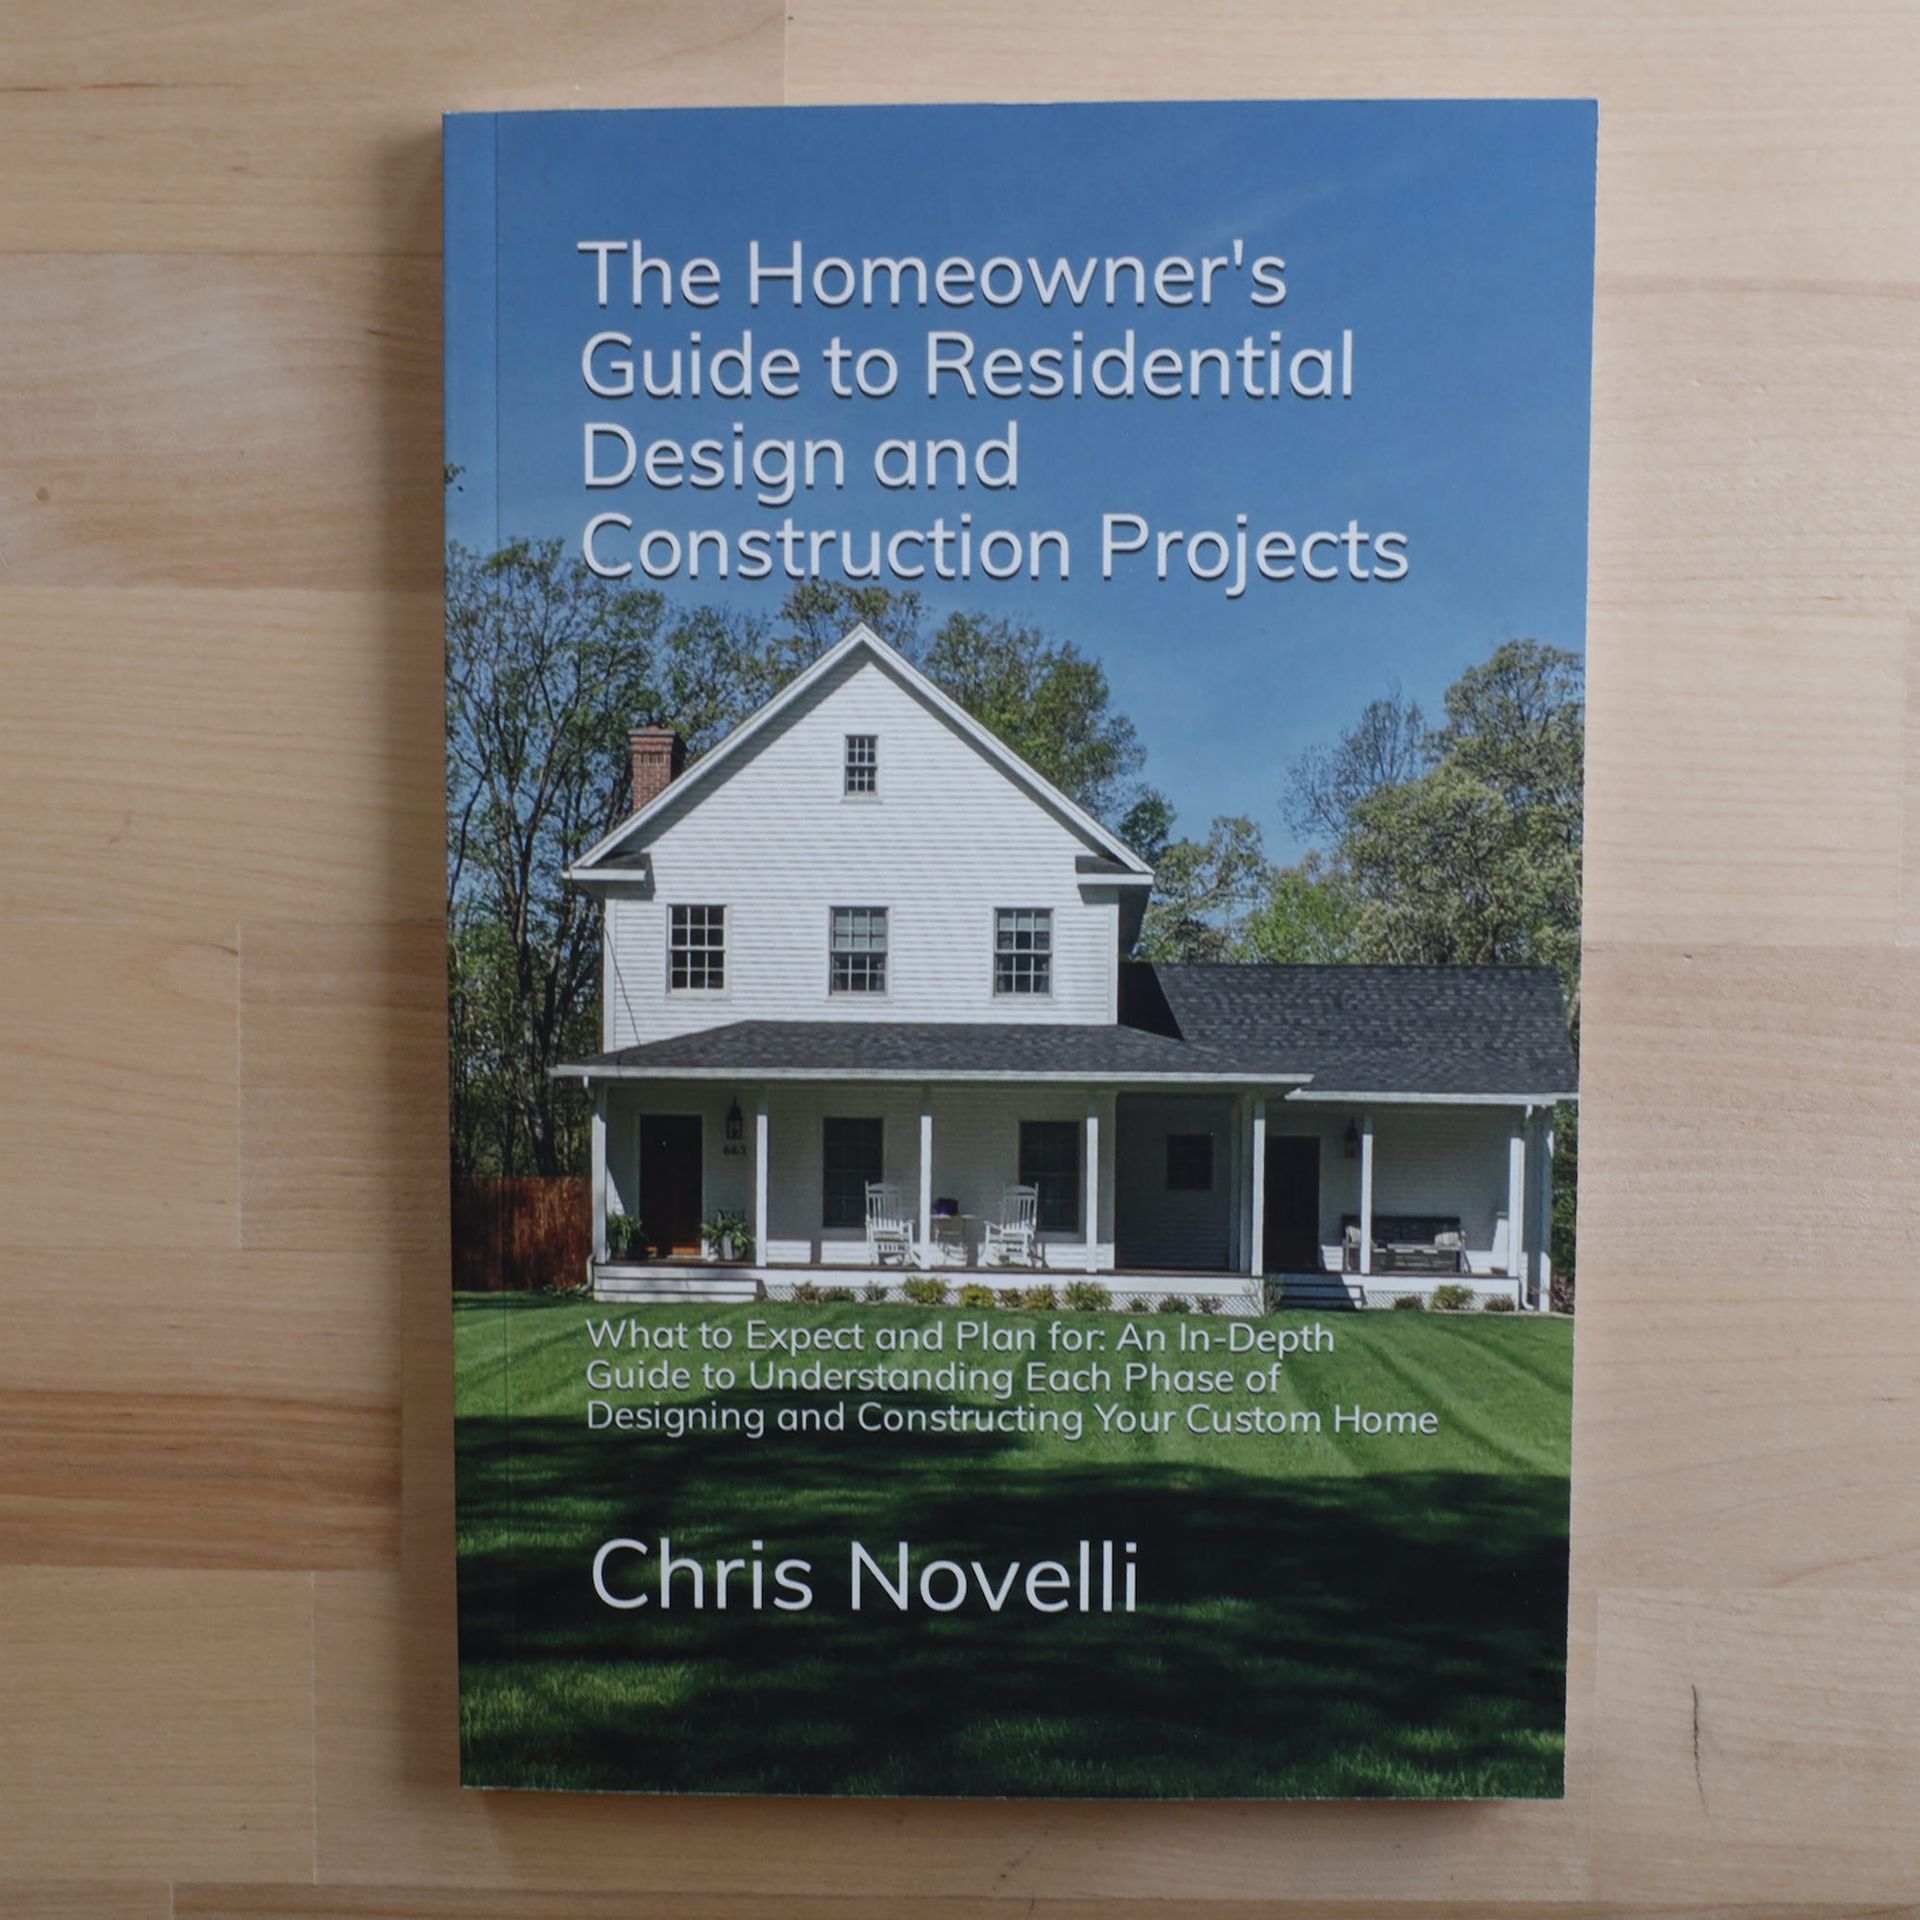 the homeowner 's guide to residential design and construction projects by chris novelli